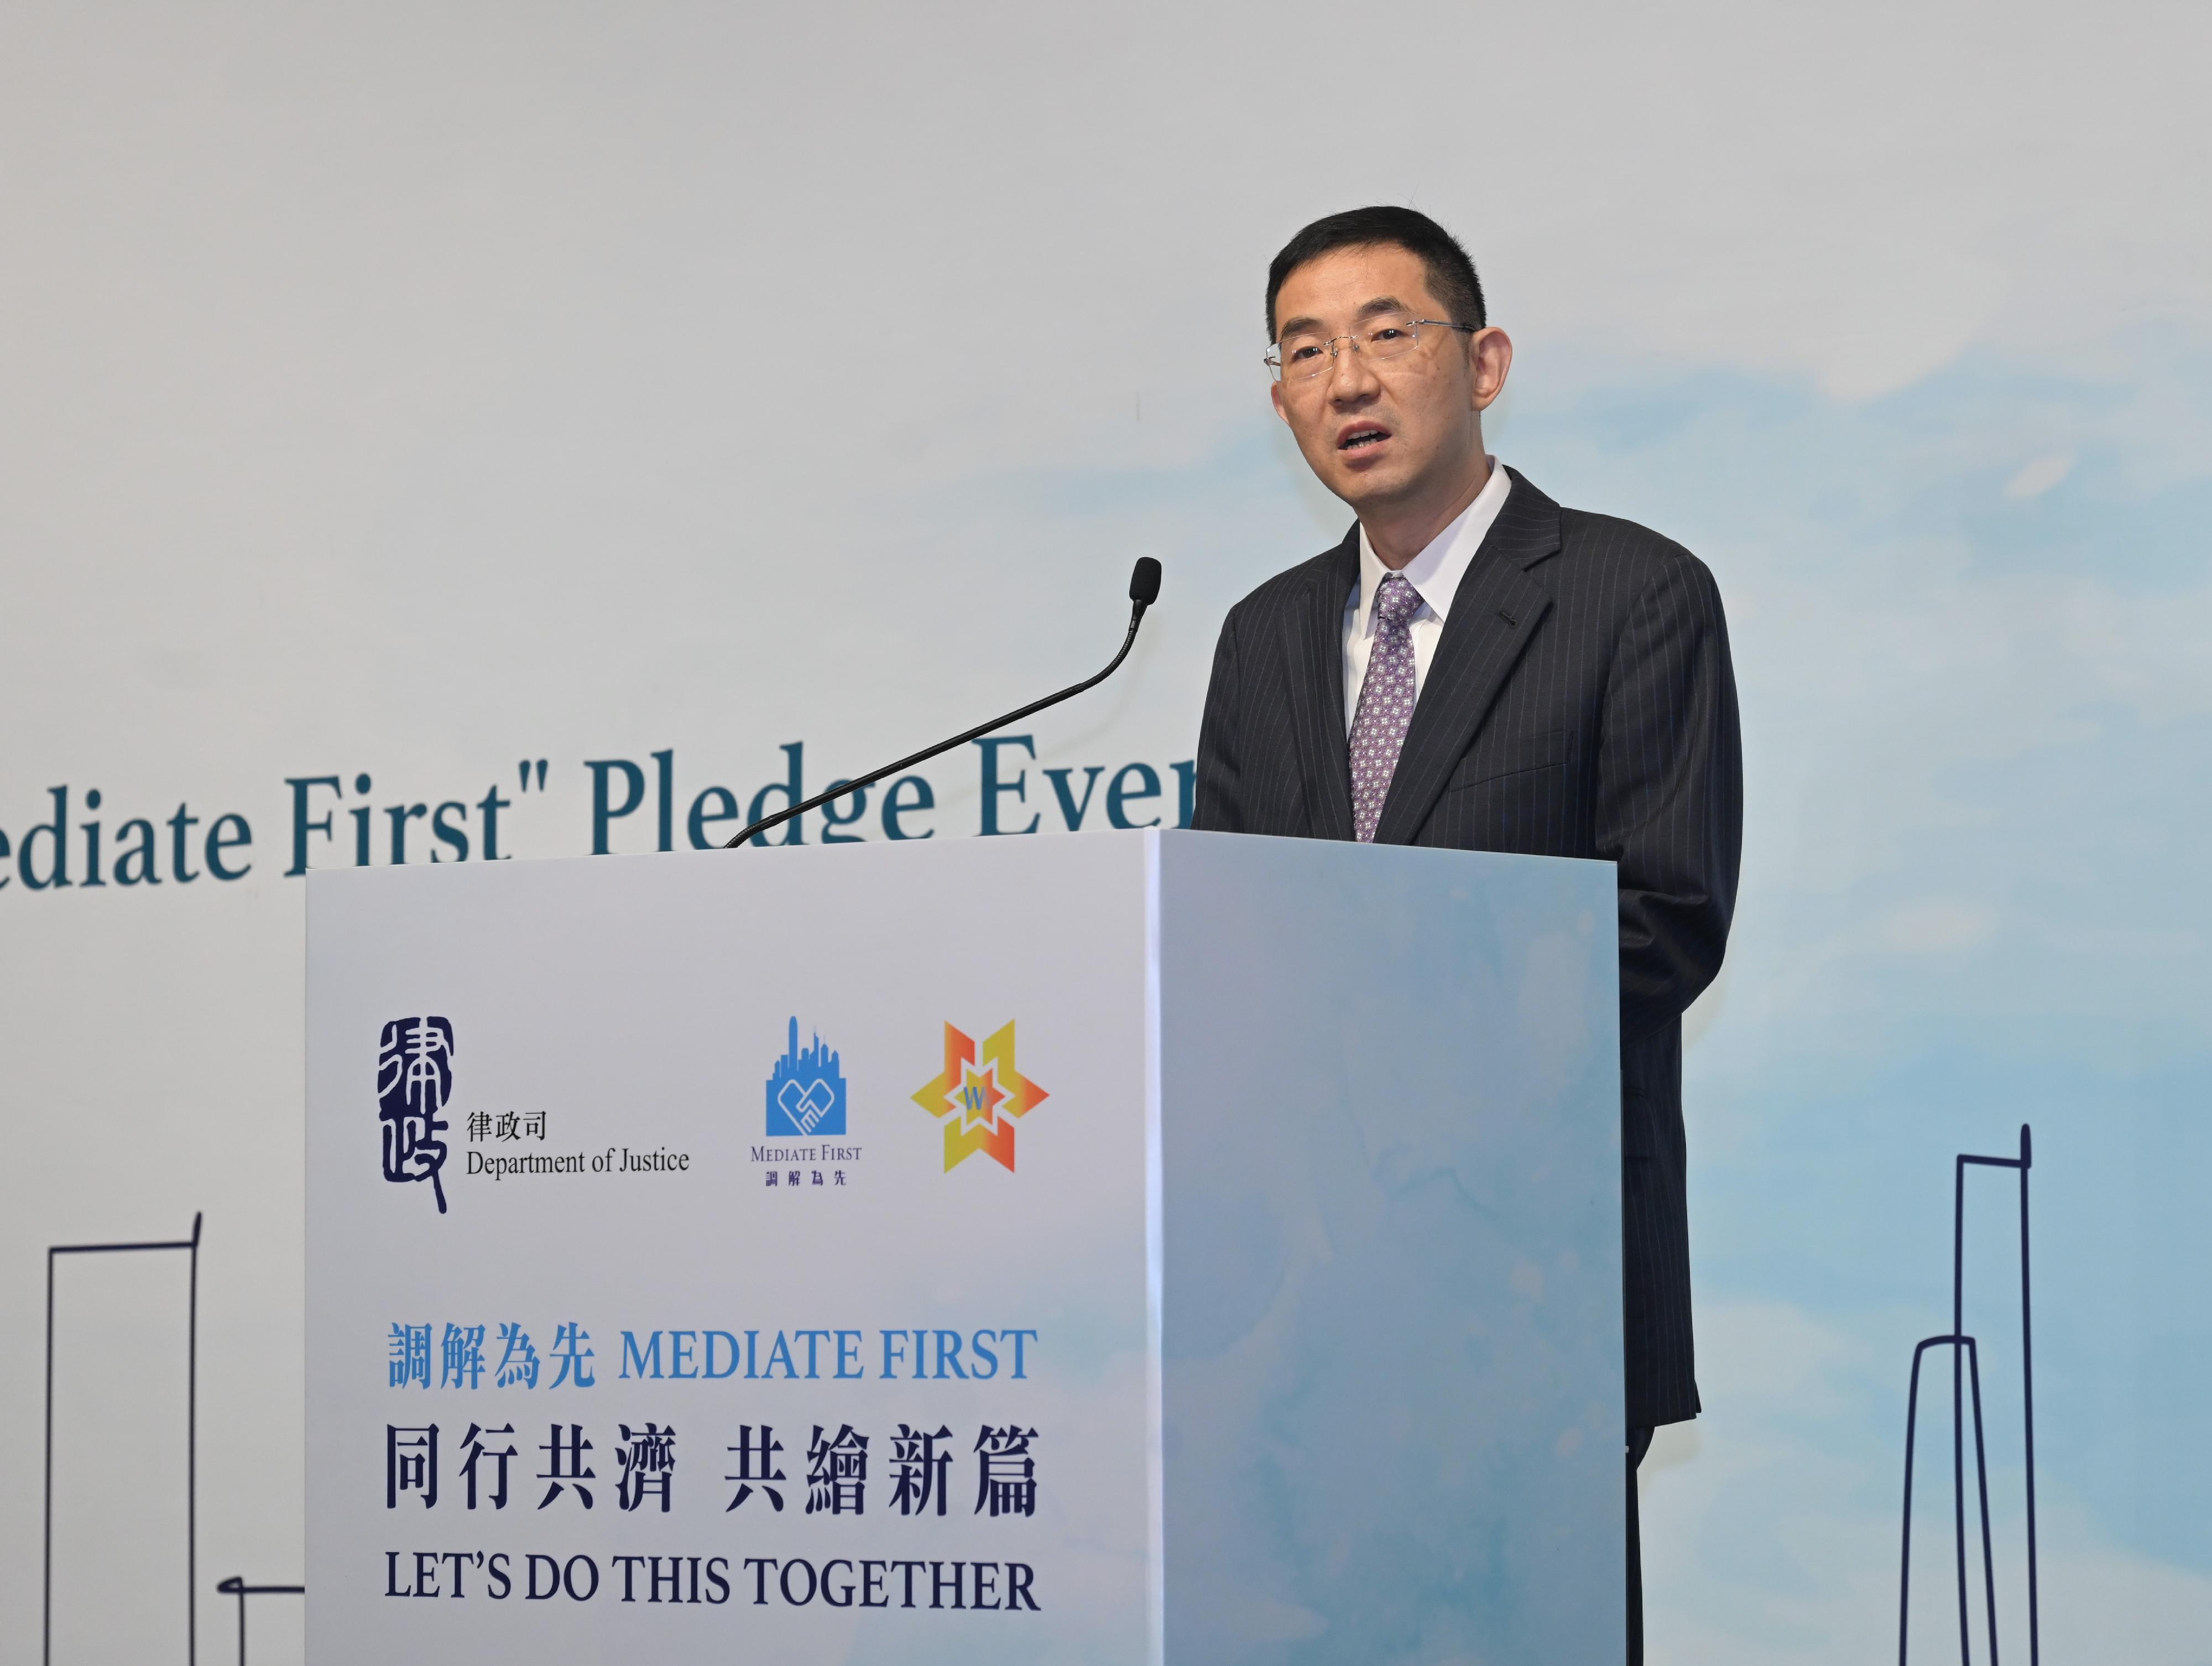 The biennial "Mediate First" Pledge Event organised by the Department of Justice was held today (May 5). Photo shows the Director-General of the International Organization for Mediation Preparatory Office, Dr Sun Jin, delivering his keynote speech.
